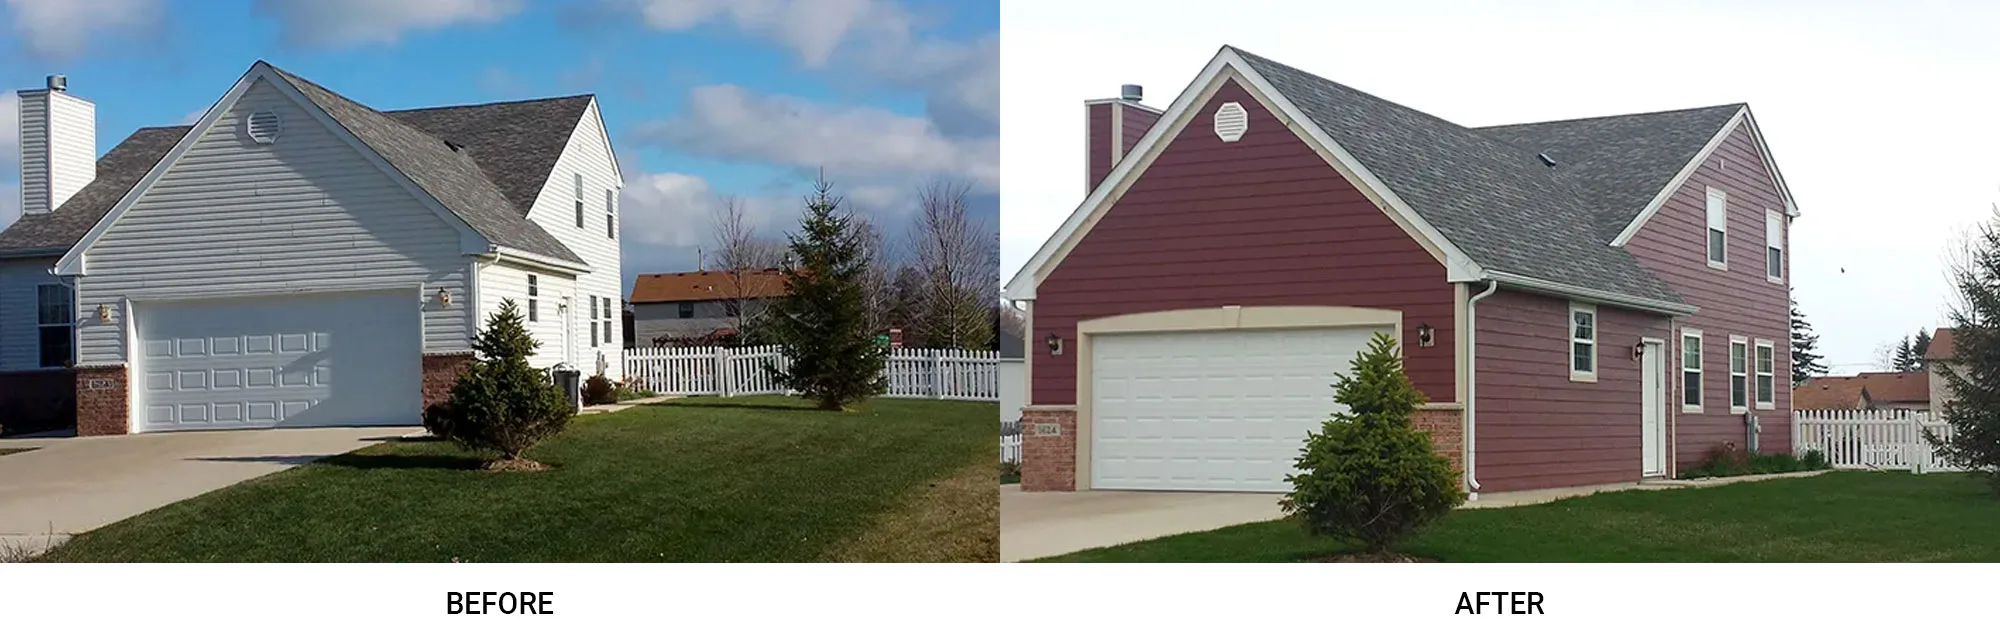 Before and After of new siding from Dick's Roof Repair Service on two story home